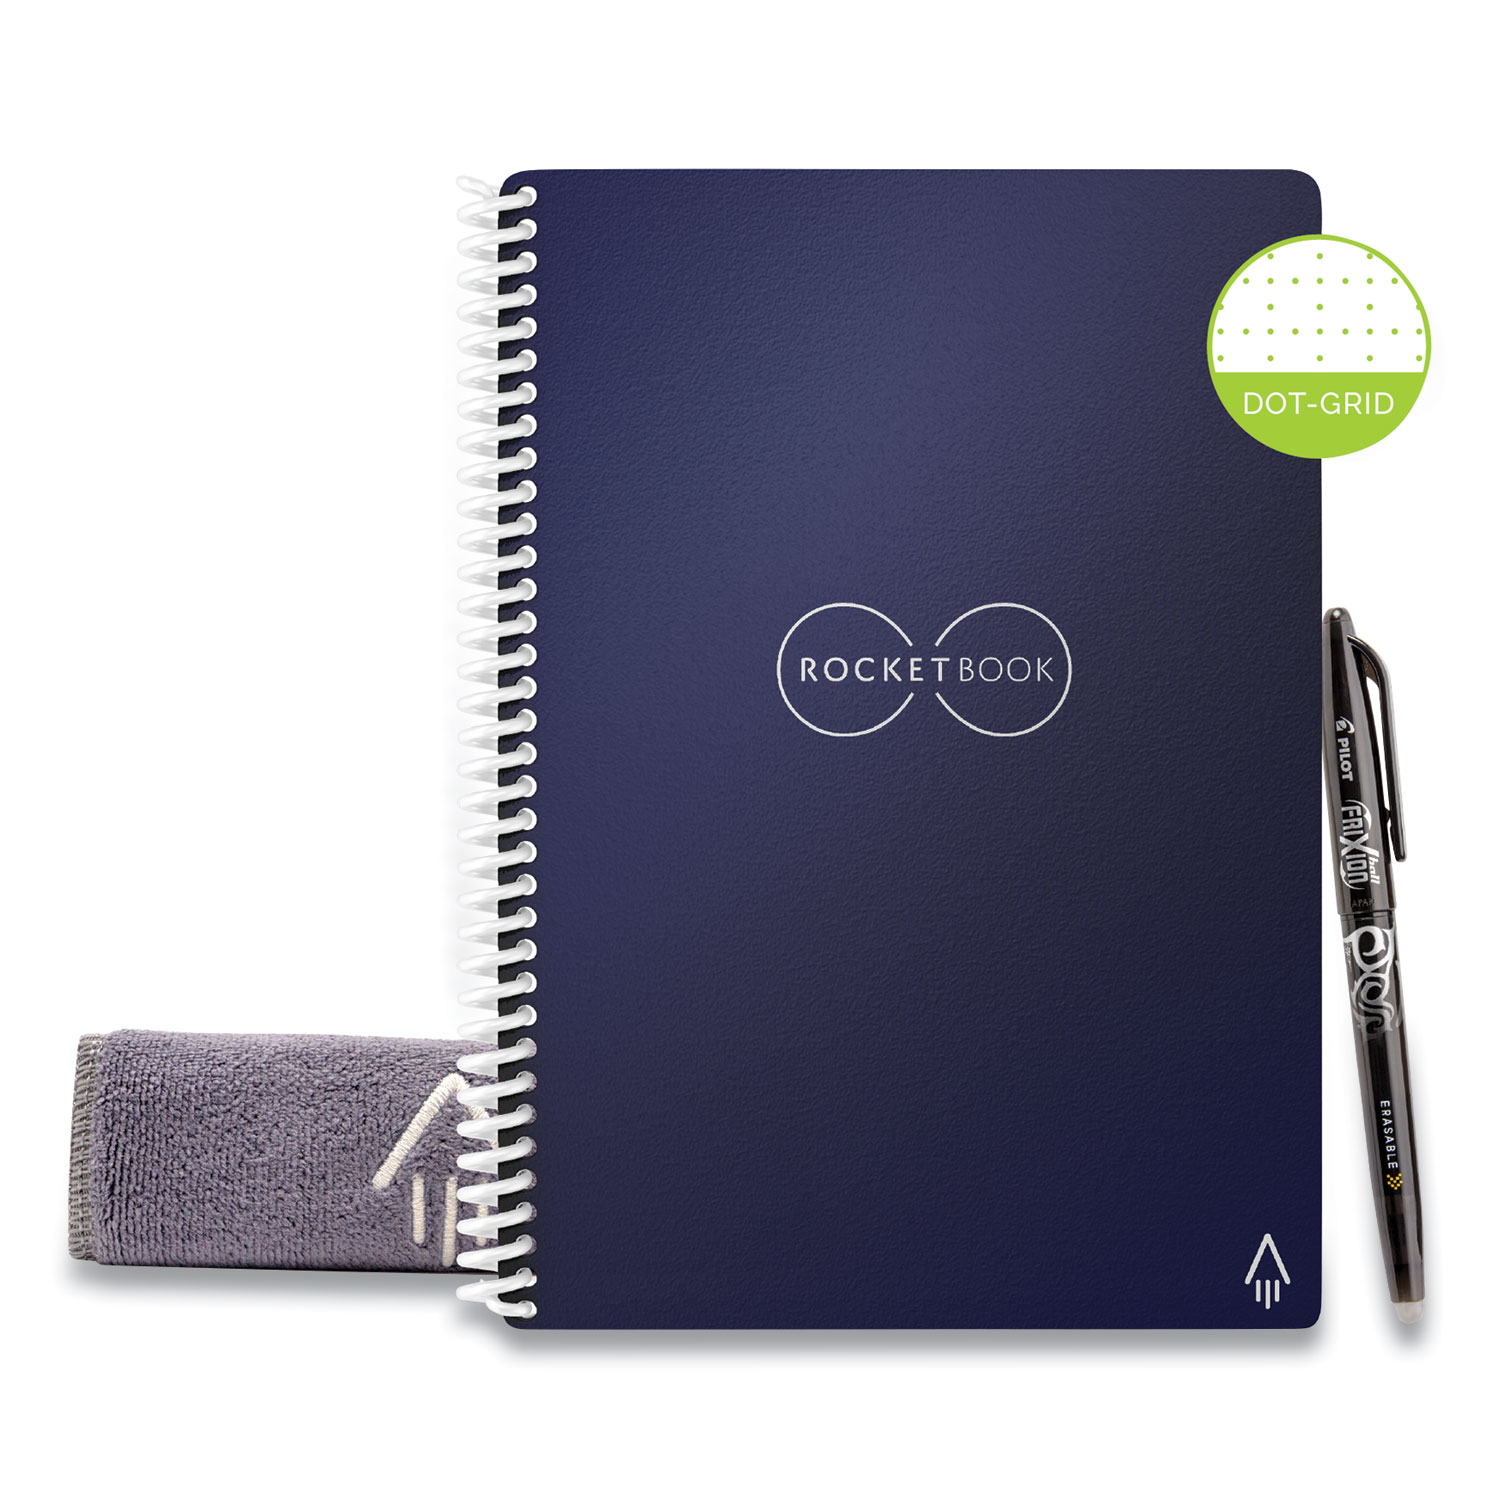  Rocketbook EVR-E-R-CDF Rocketbook Everlast Smart Reusable Notebook, Dotted Rule, Midnight Blue Cover, 6 x 8.8, 18 Sheets (RKB24328143) 